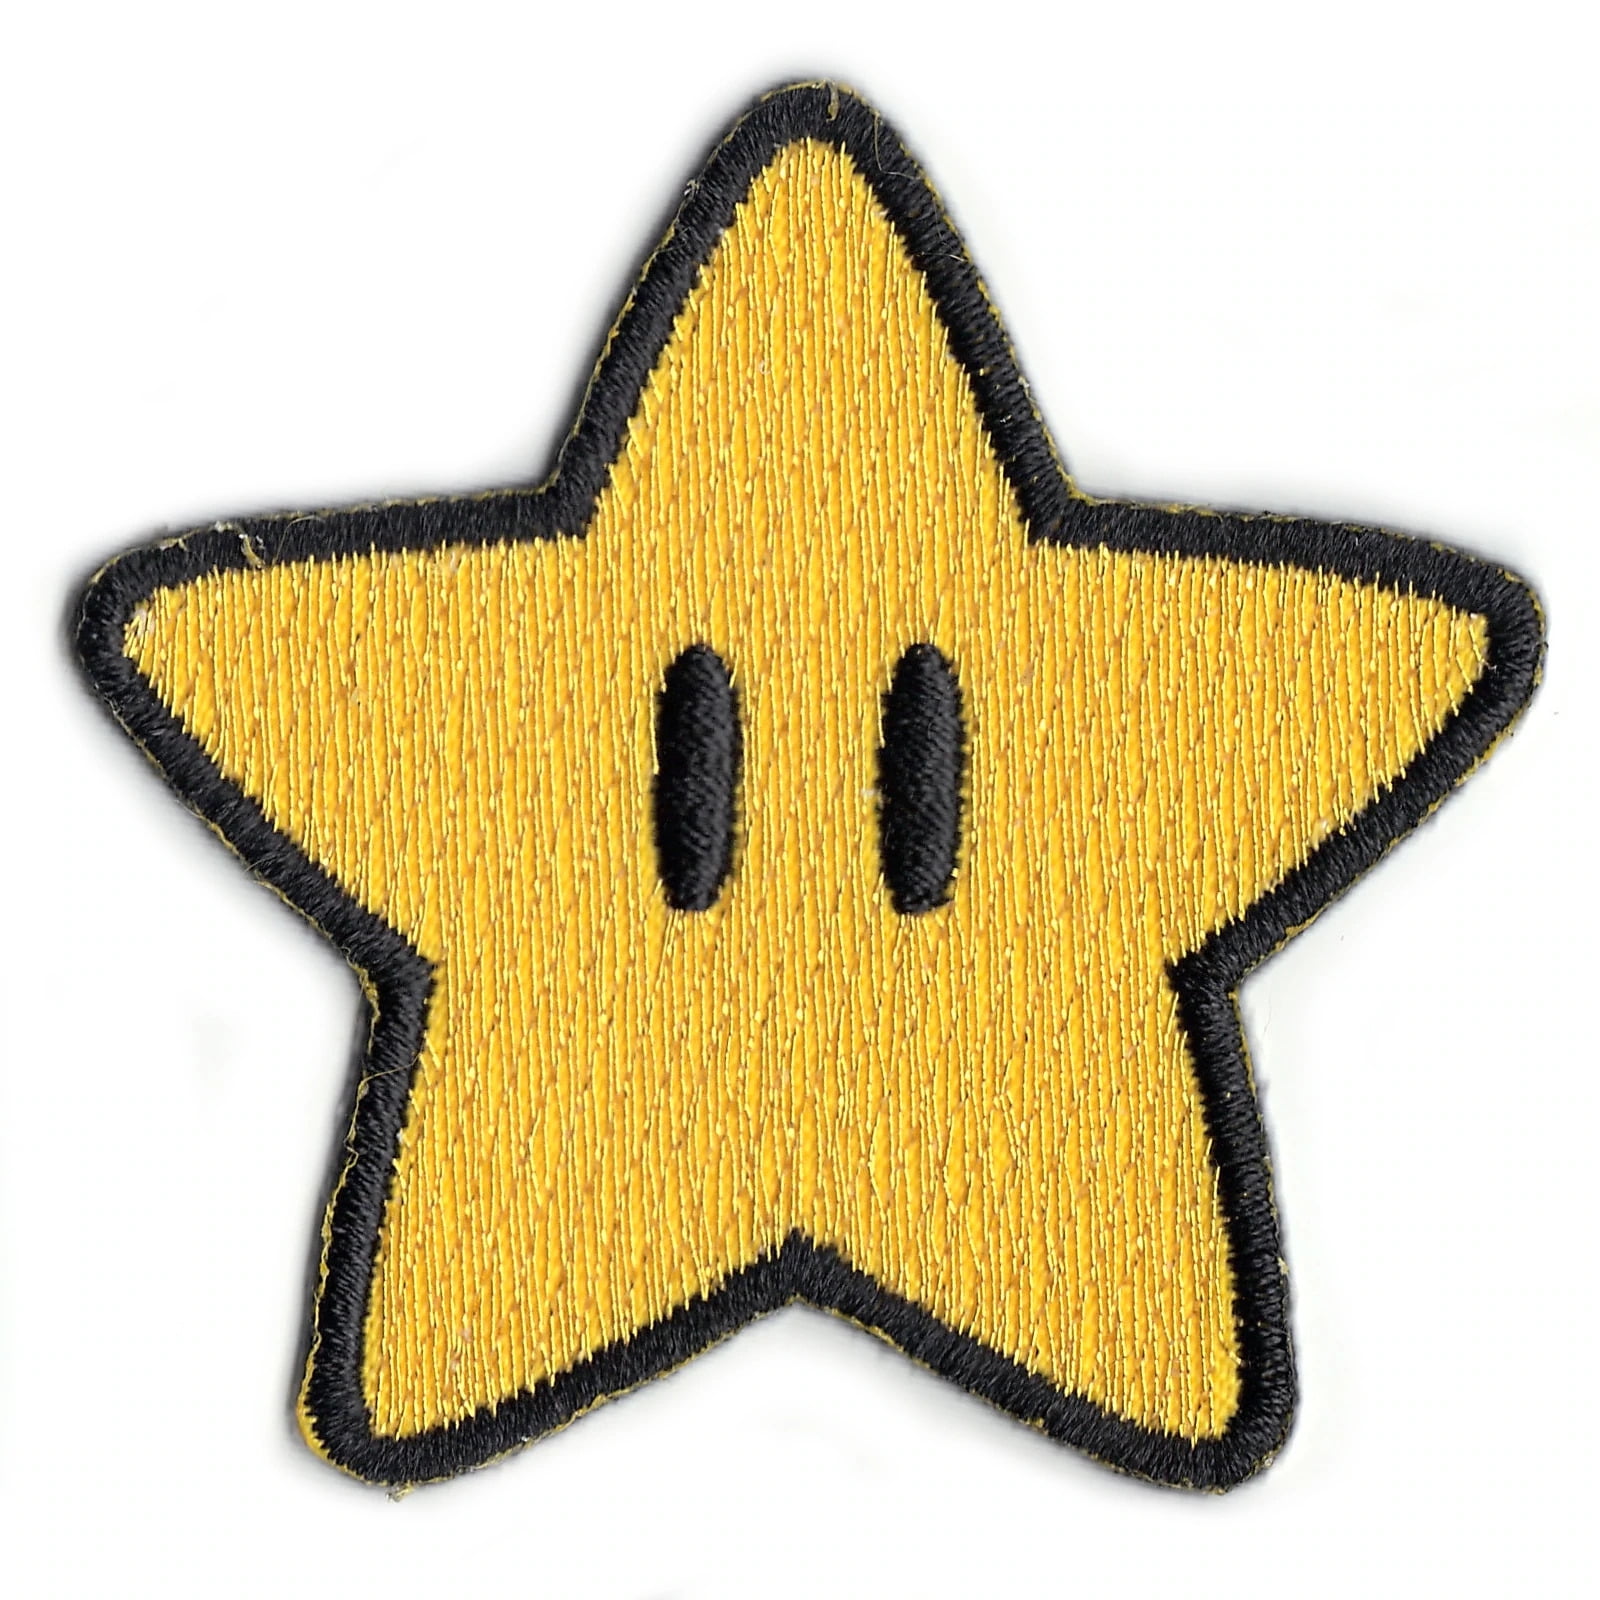 GOLD POWER STAR SUPER MARIO BROTHER PATCH EMBROIDERED IRON/SEW ON APPLIQUE BADGE